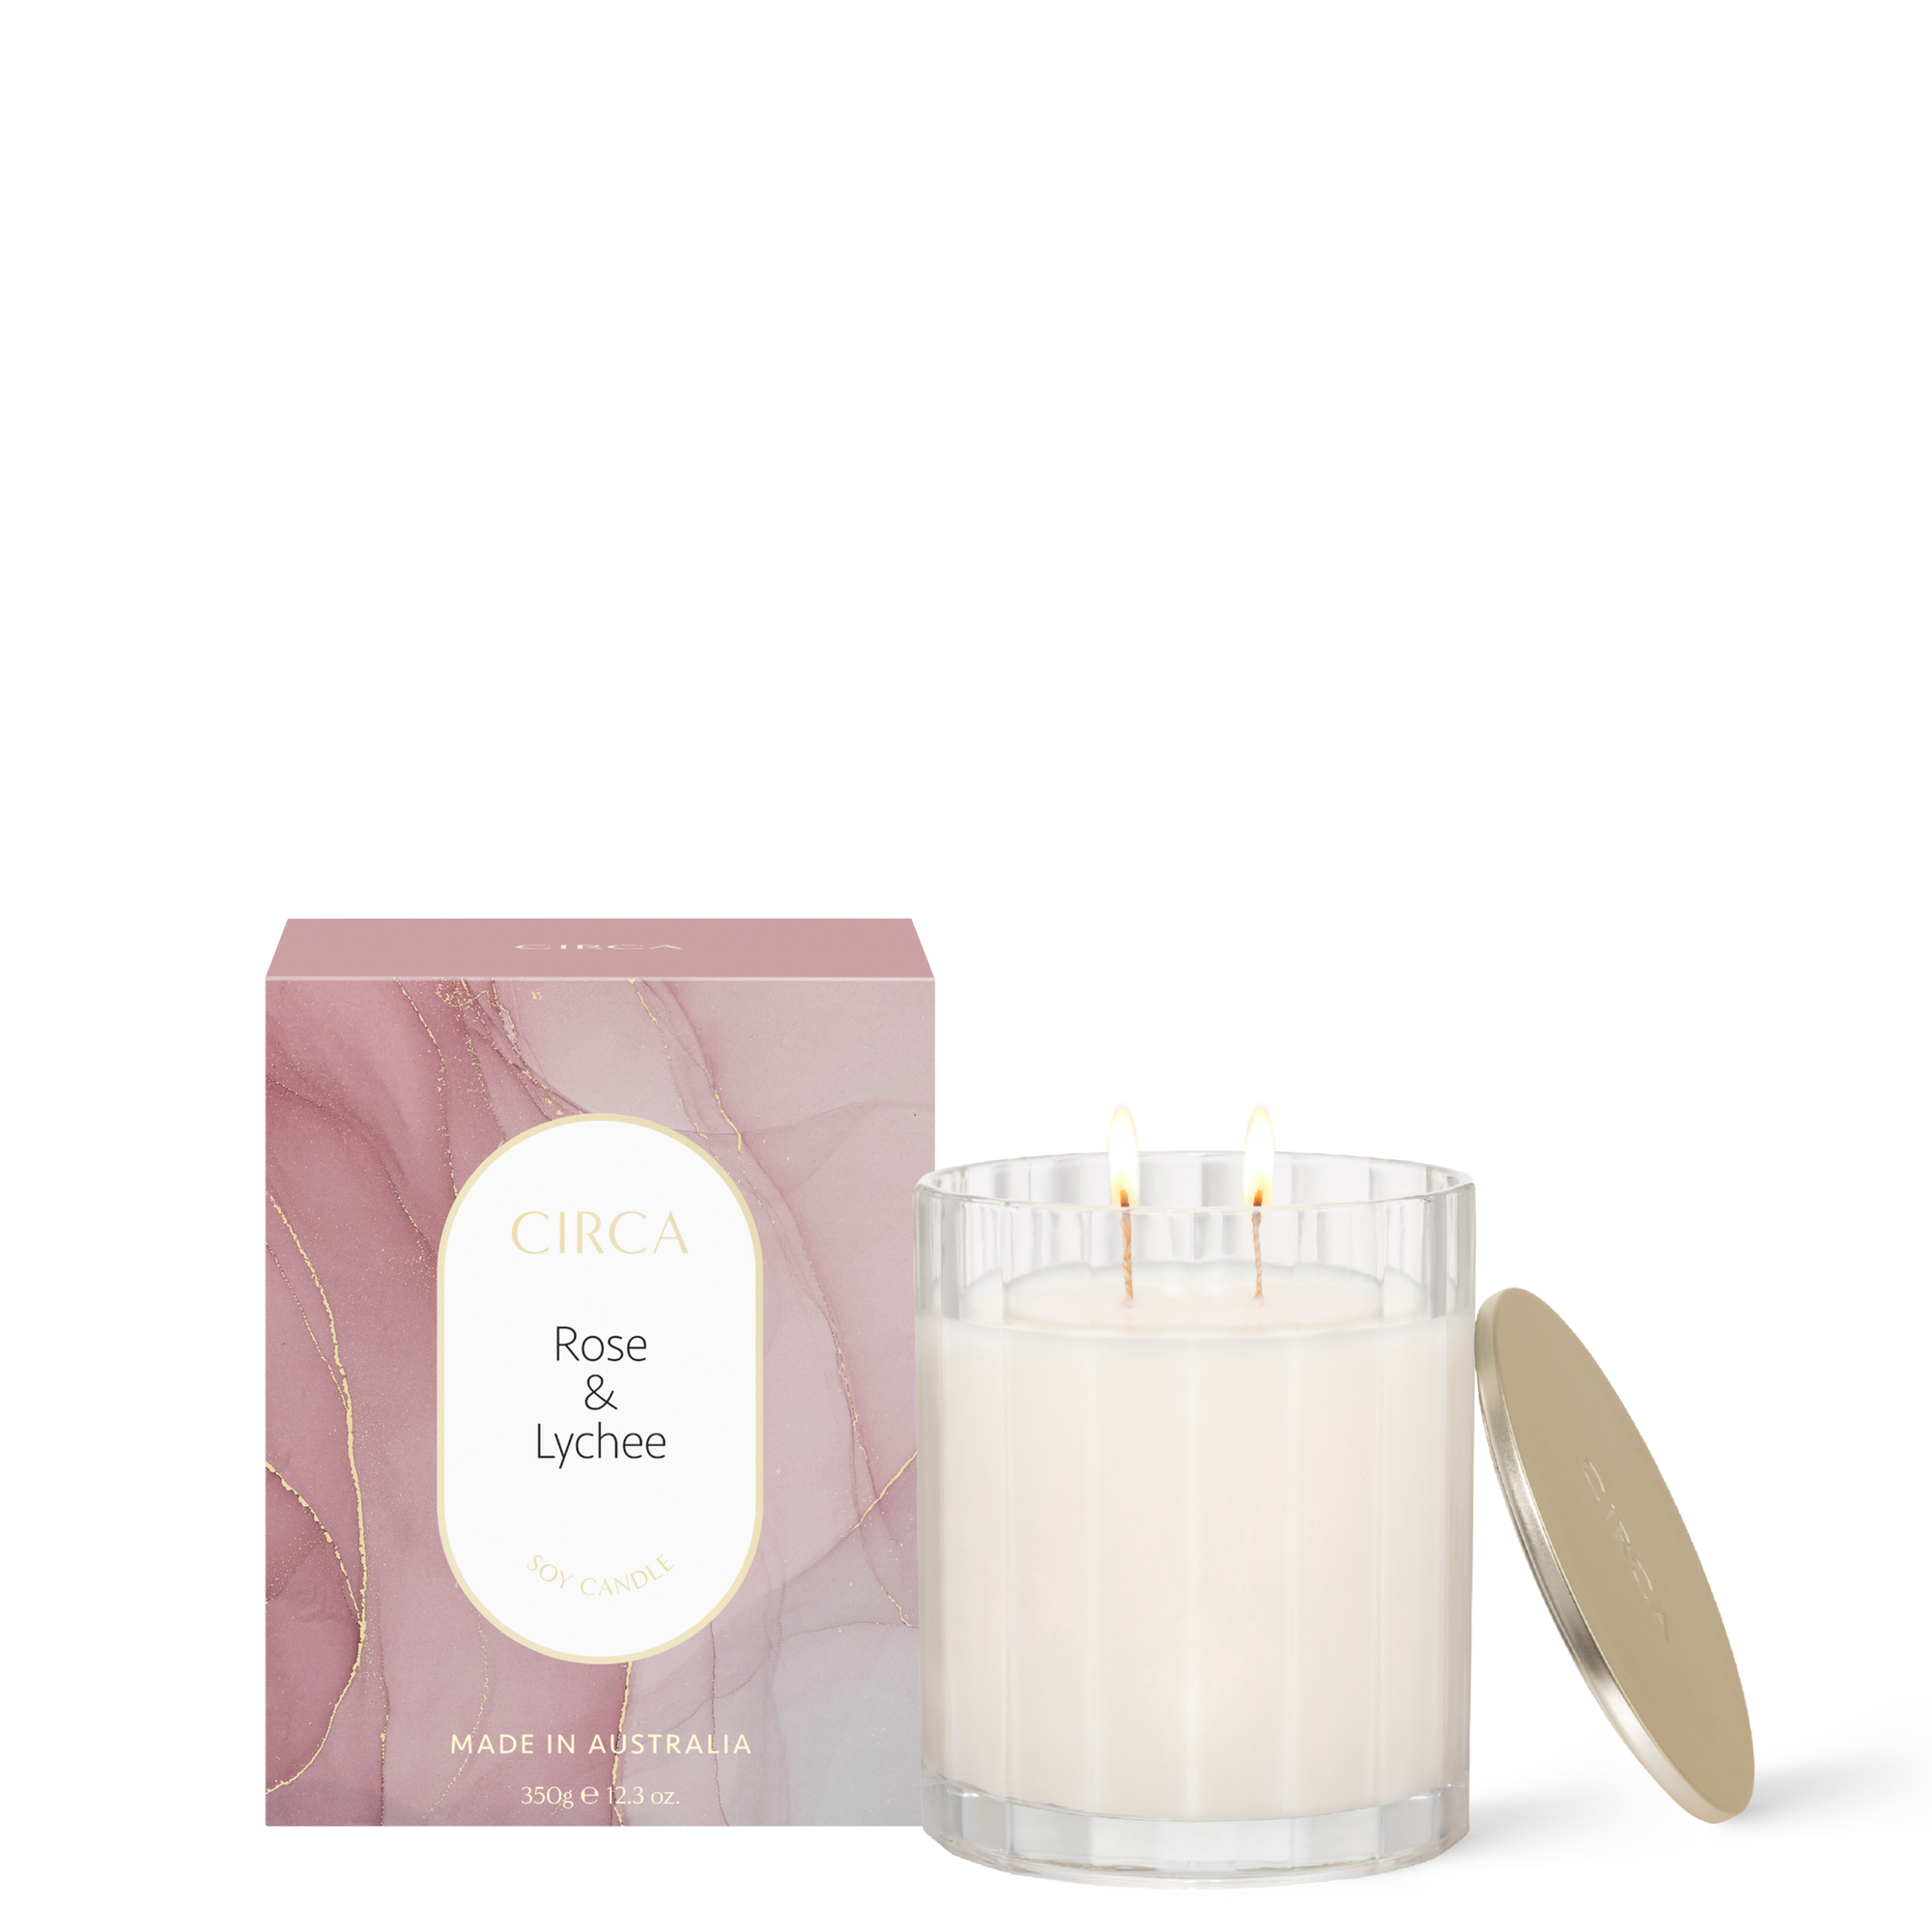 CIRCA 350g Candle - ROSE & LYCHEE